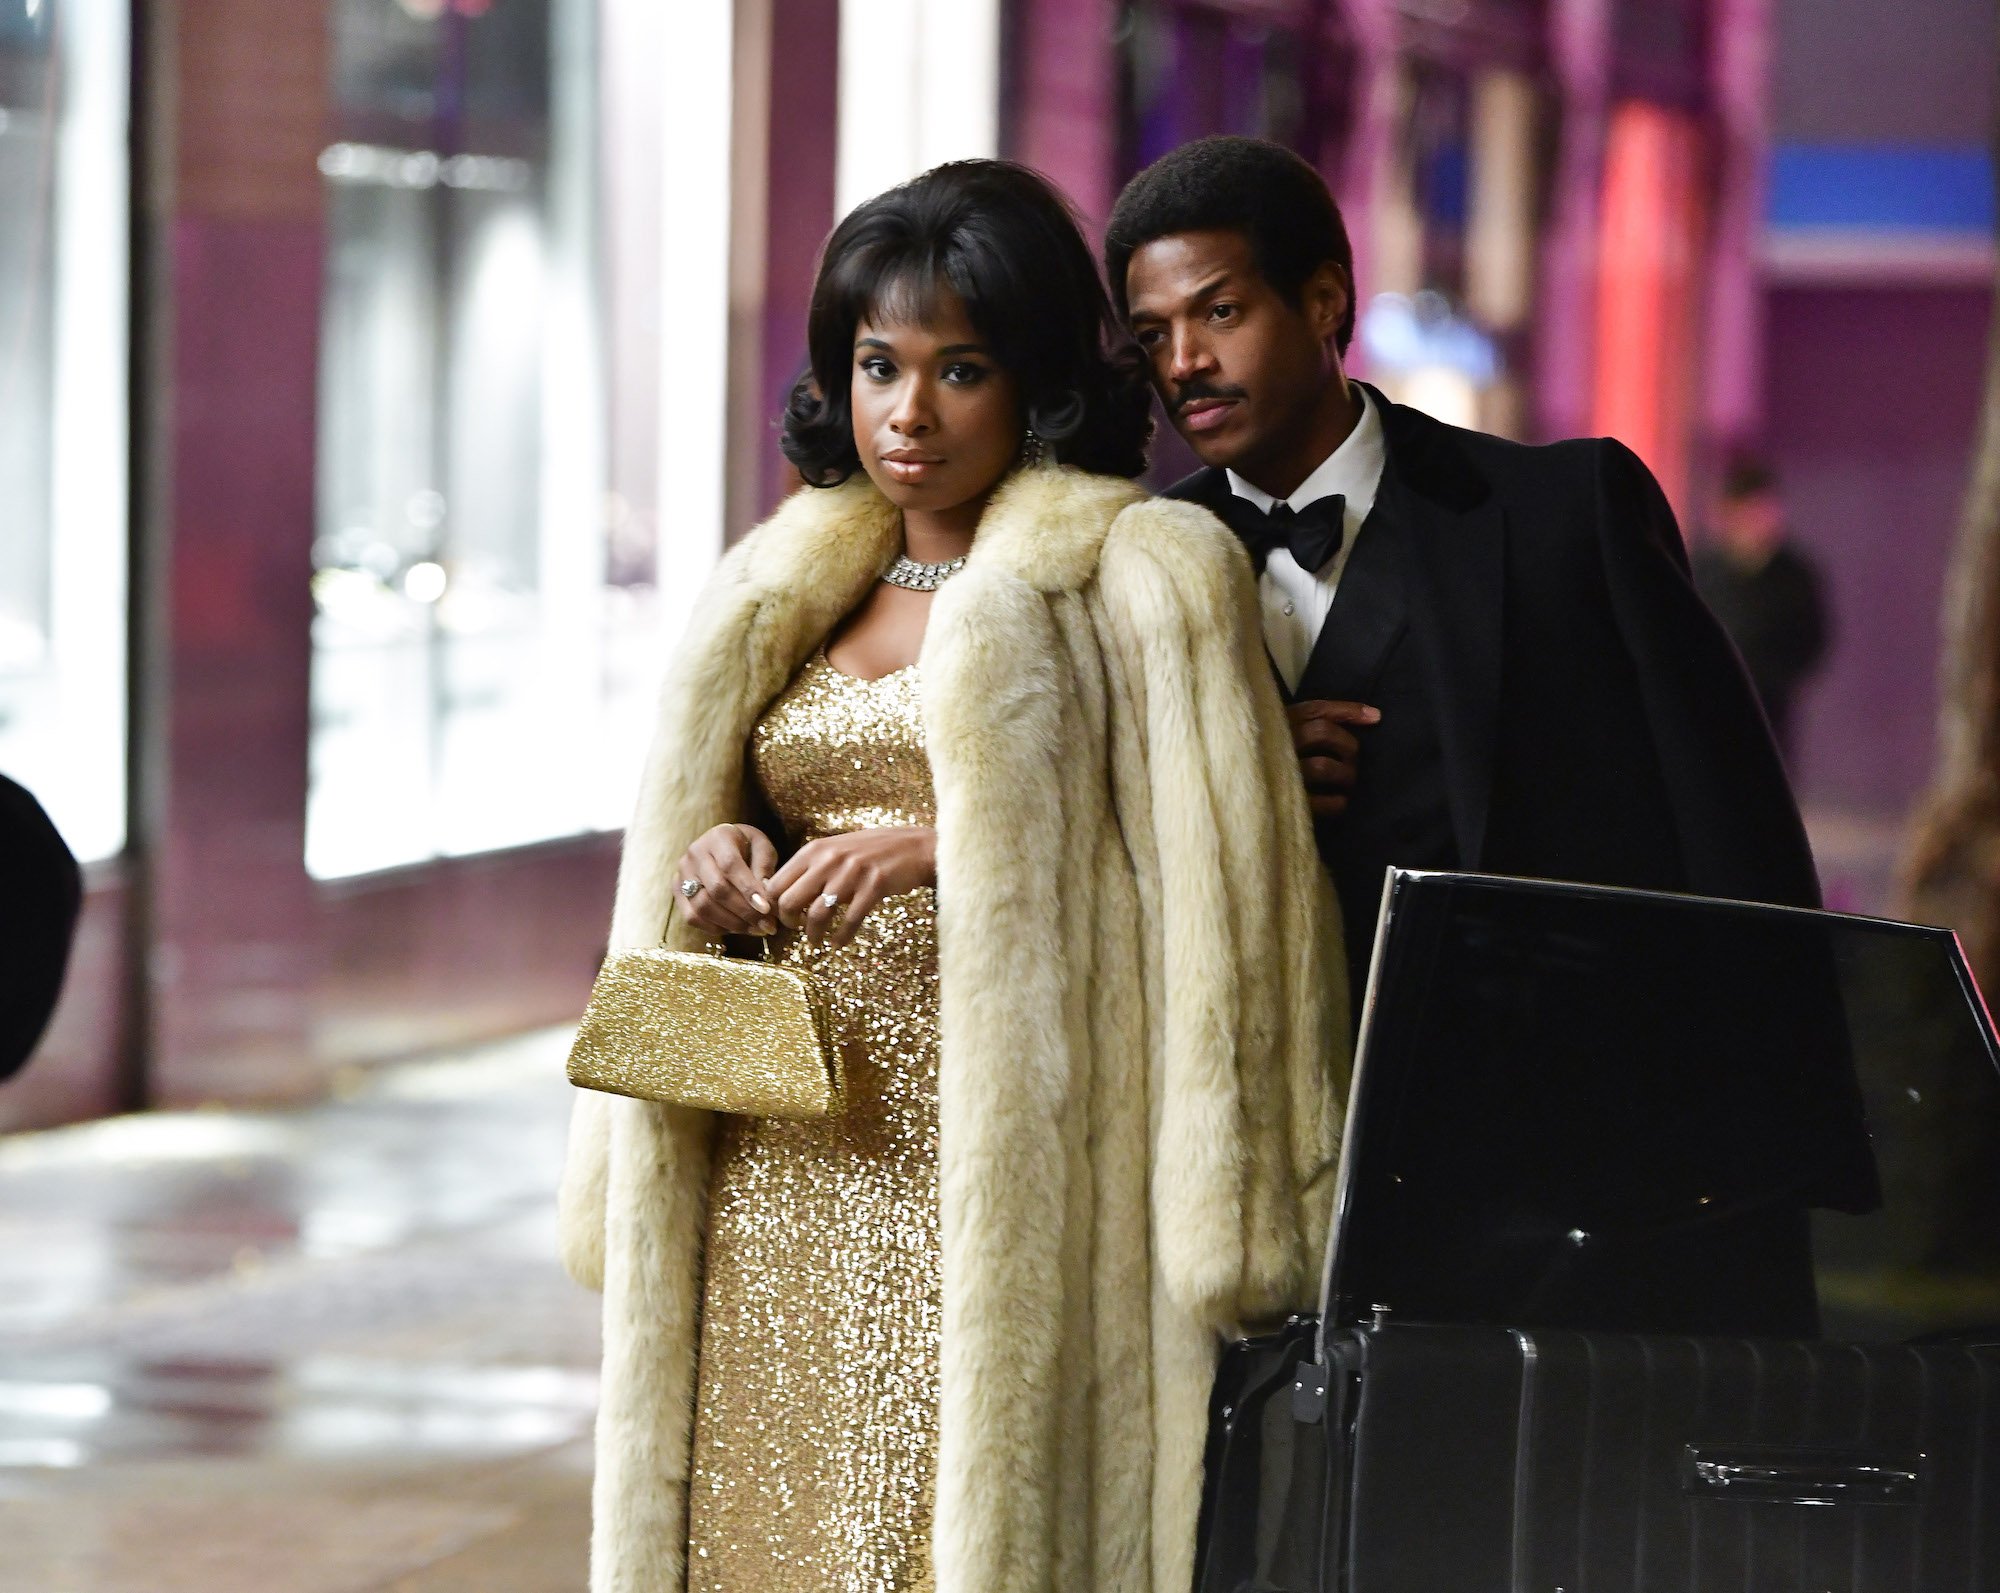 Jennifer Hudson and Marlon Wayans filming their upcoming movie, 'Respect', in NYC